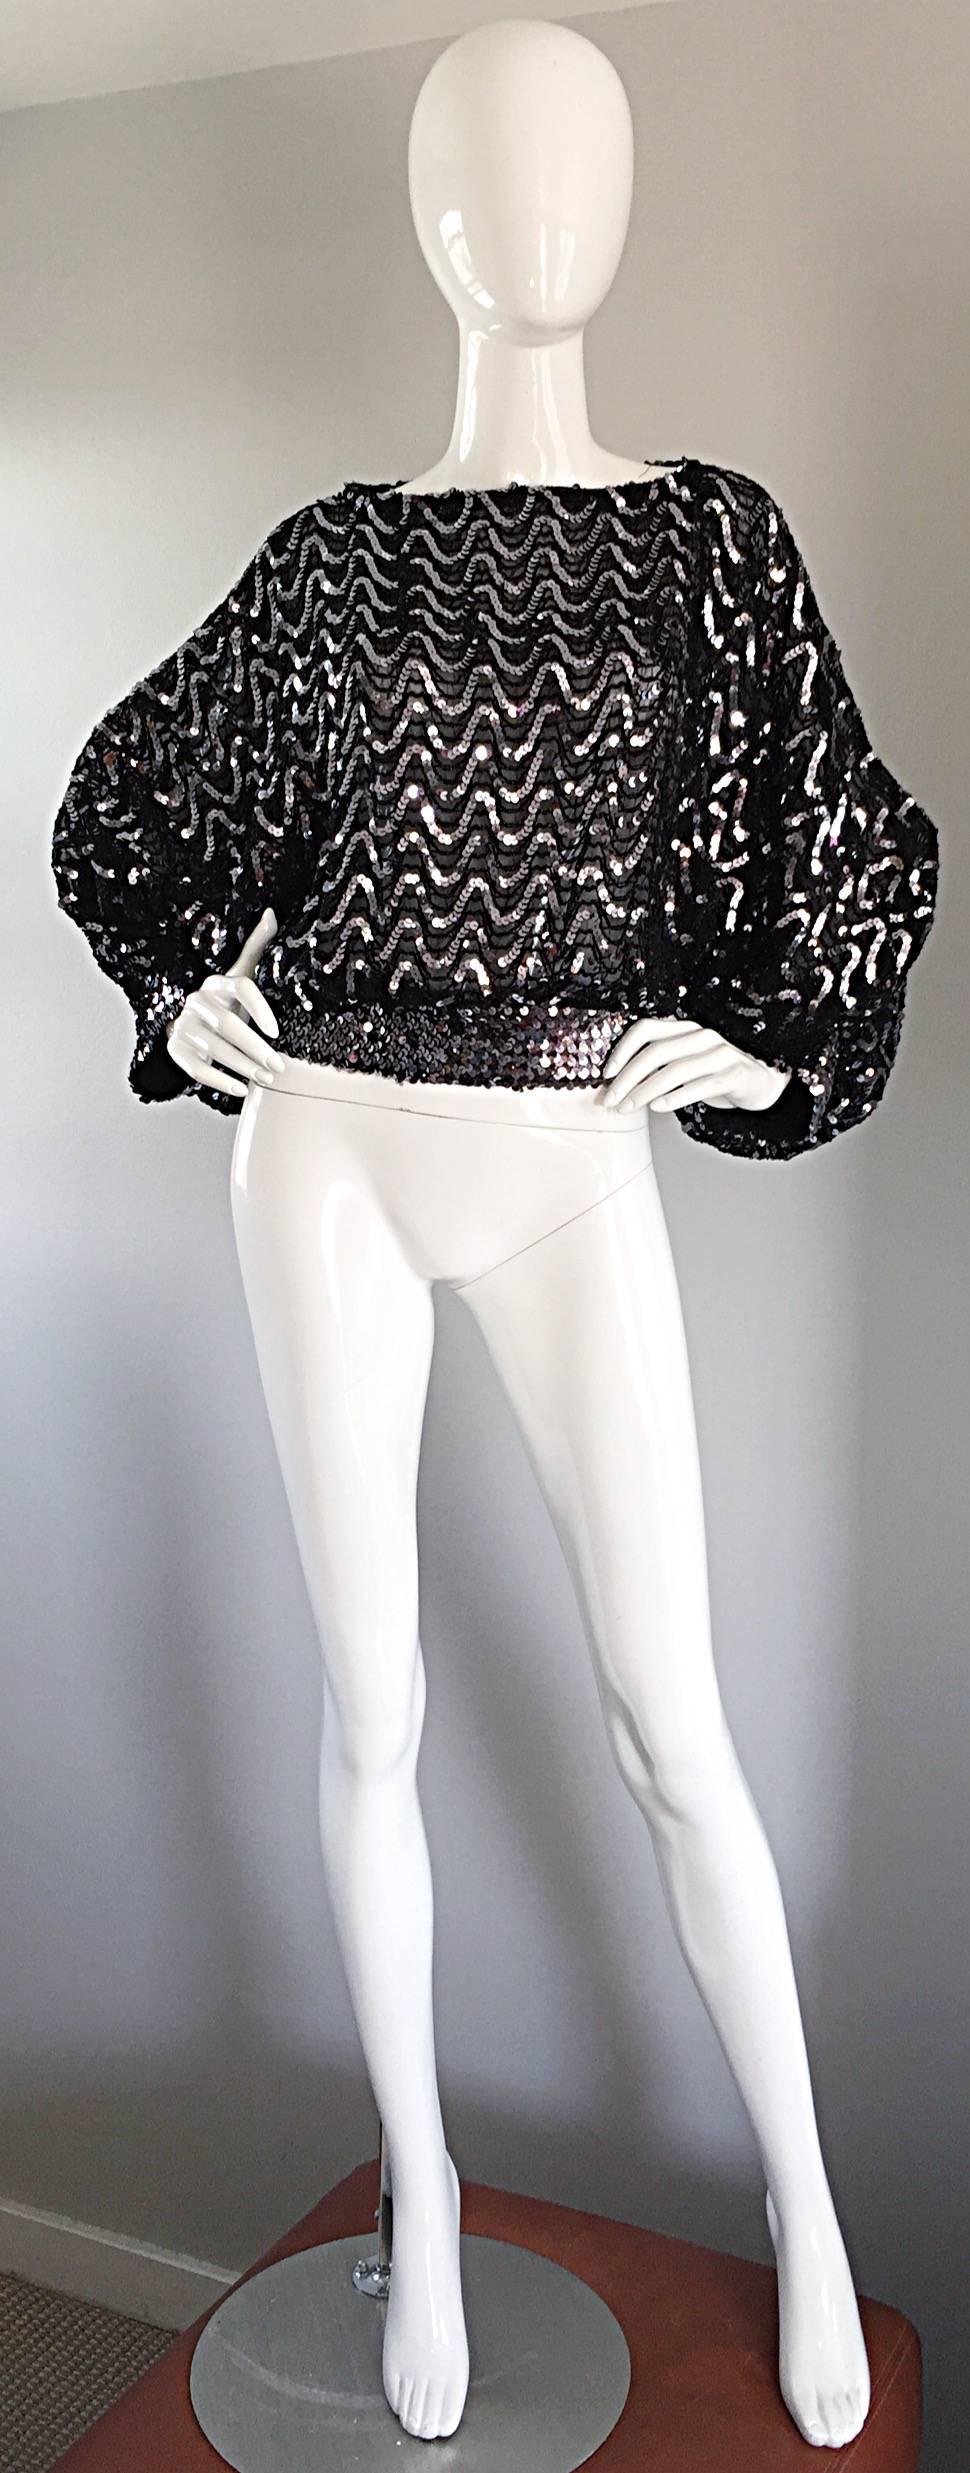 Superb vintage 1980s JEANETTE KASTENBERG for St. Martin black and silver sequin top! Features all over sequins in a zig-zag pattern. Silver sequin waistband and sleeve cuffs. Amazing full dolman sleeves. Chic peek-a-boo at back neck. Words cannot